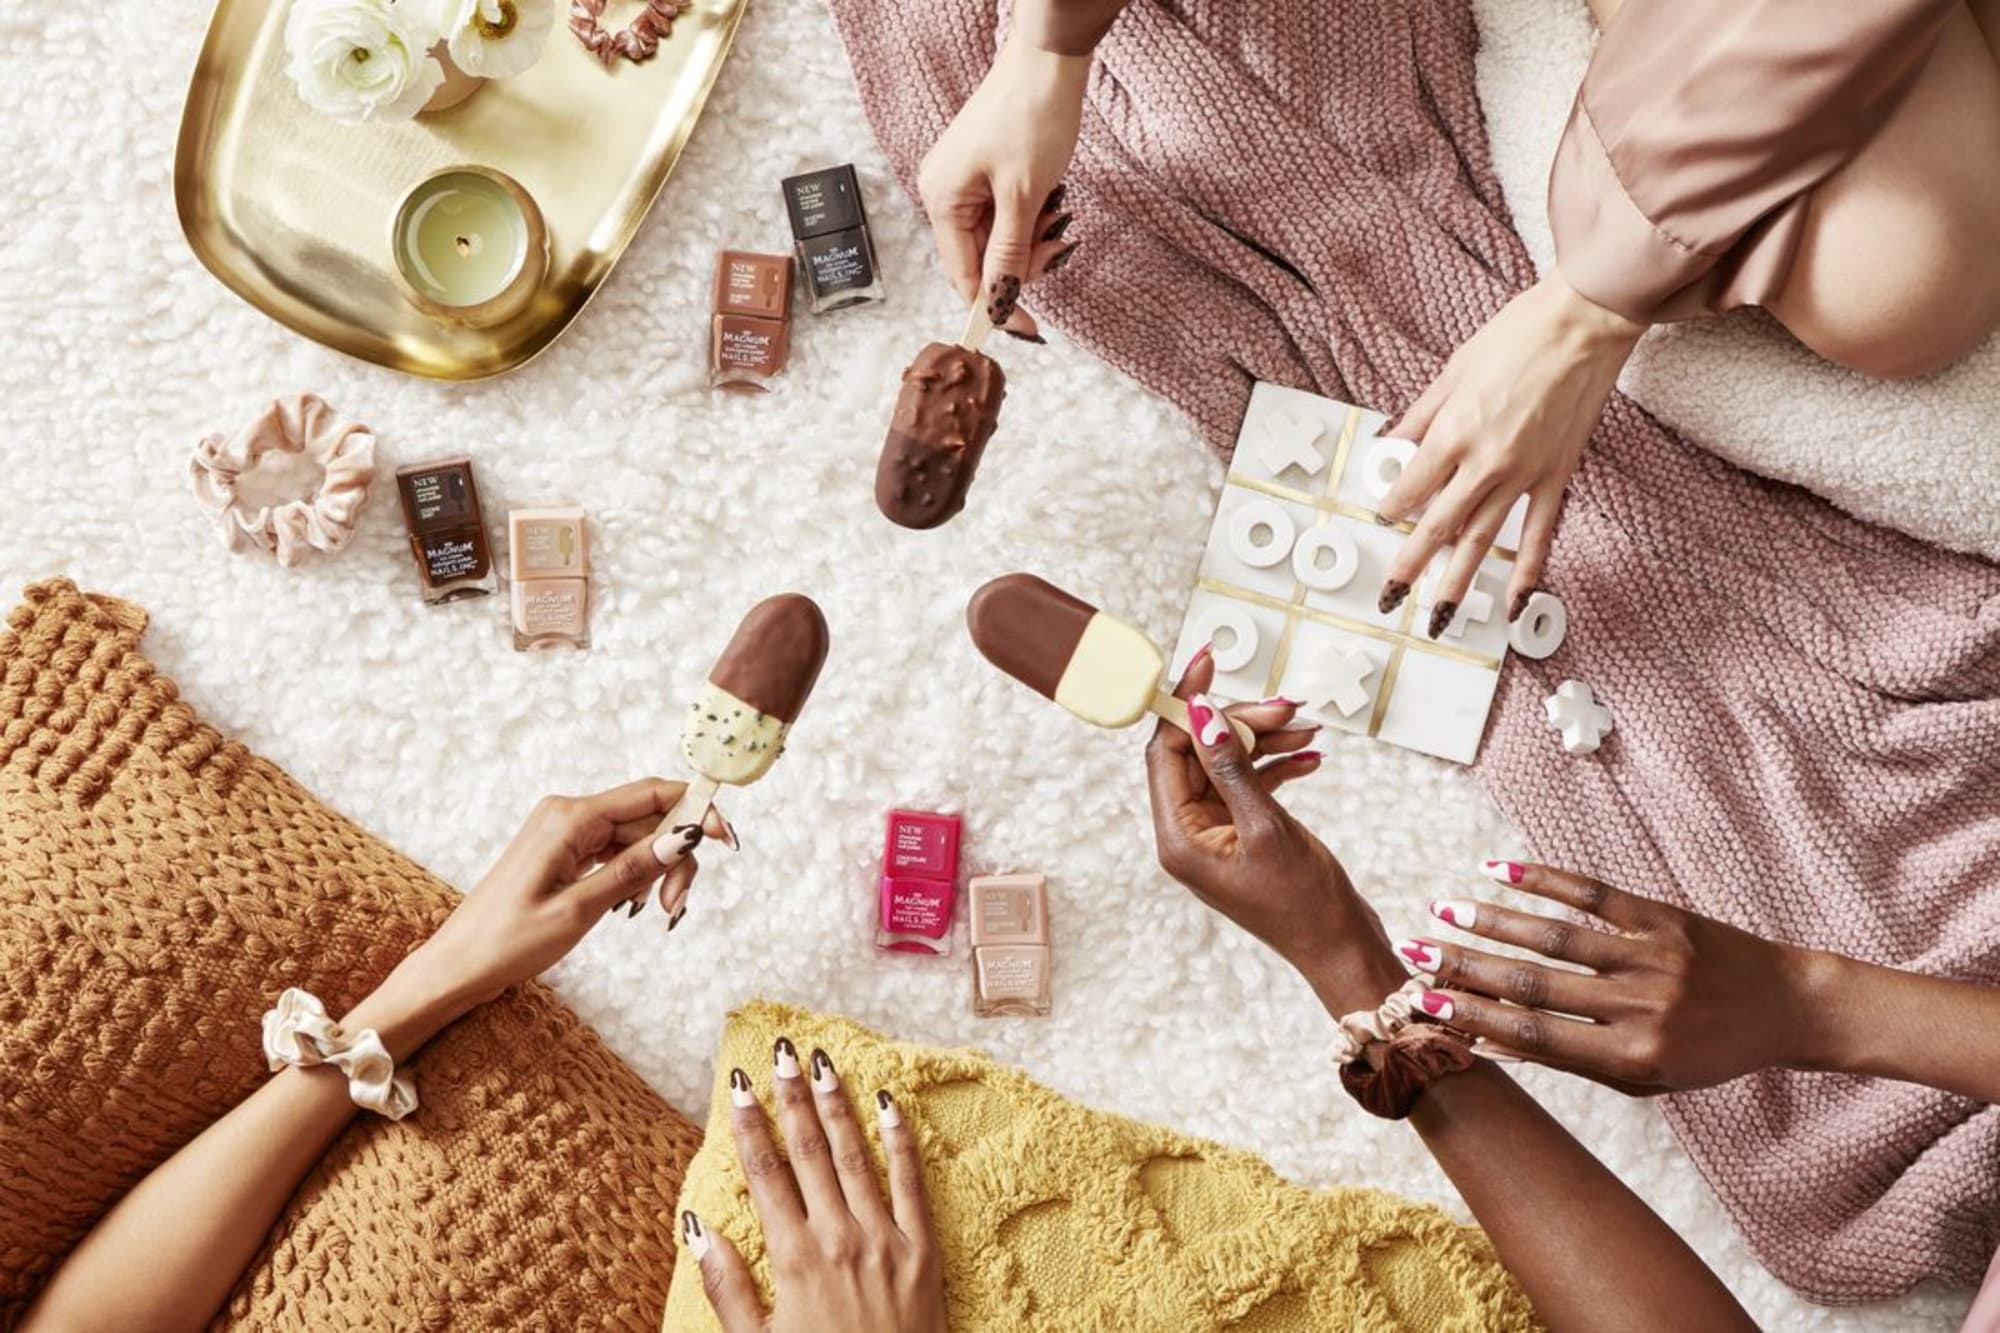 Magnum Ice Cream and Nails INC collab on new nail polish line